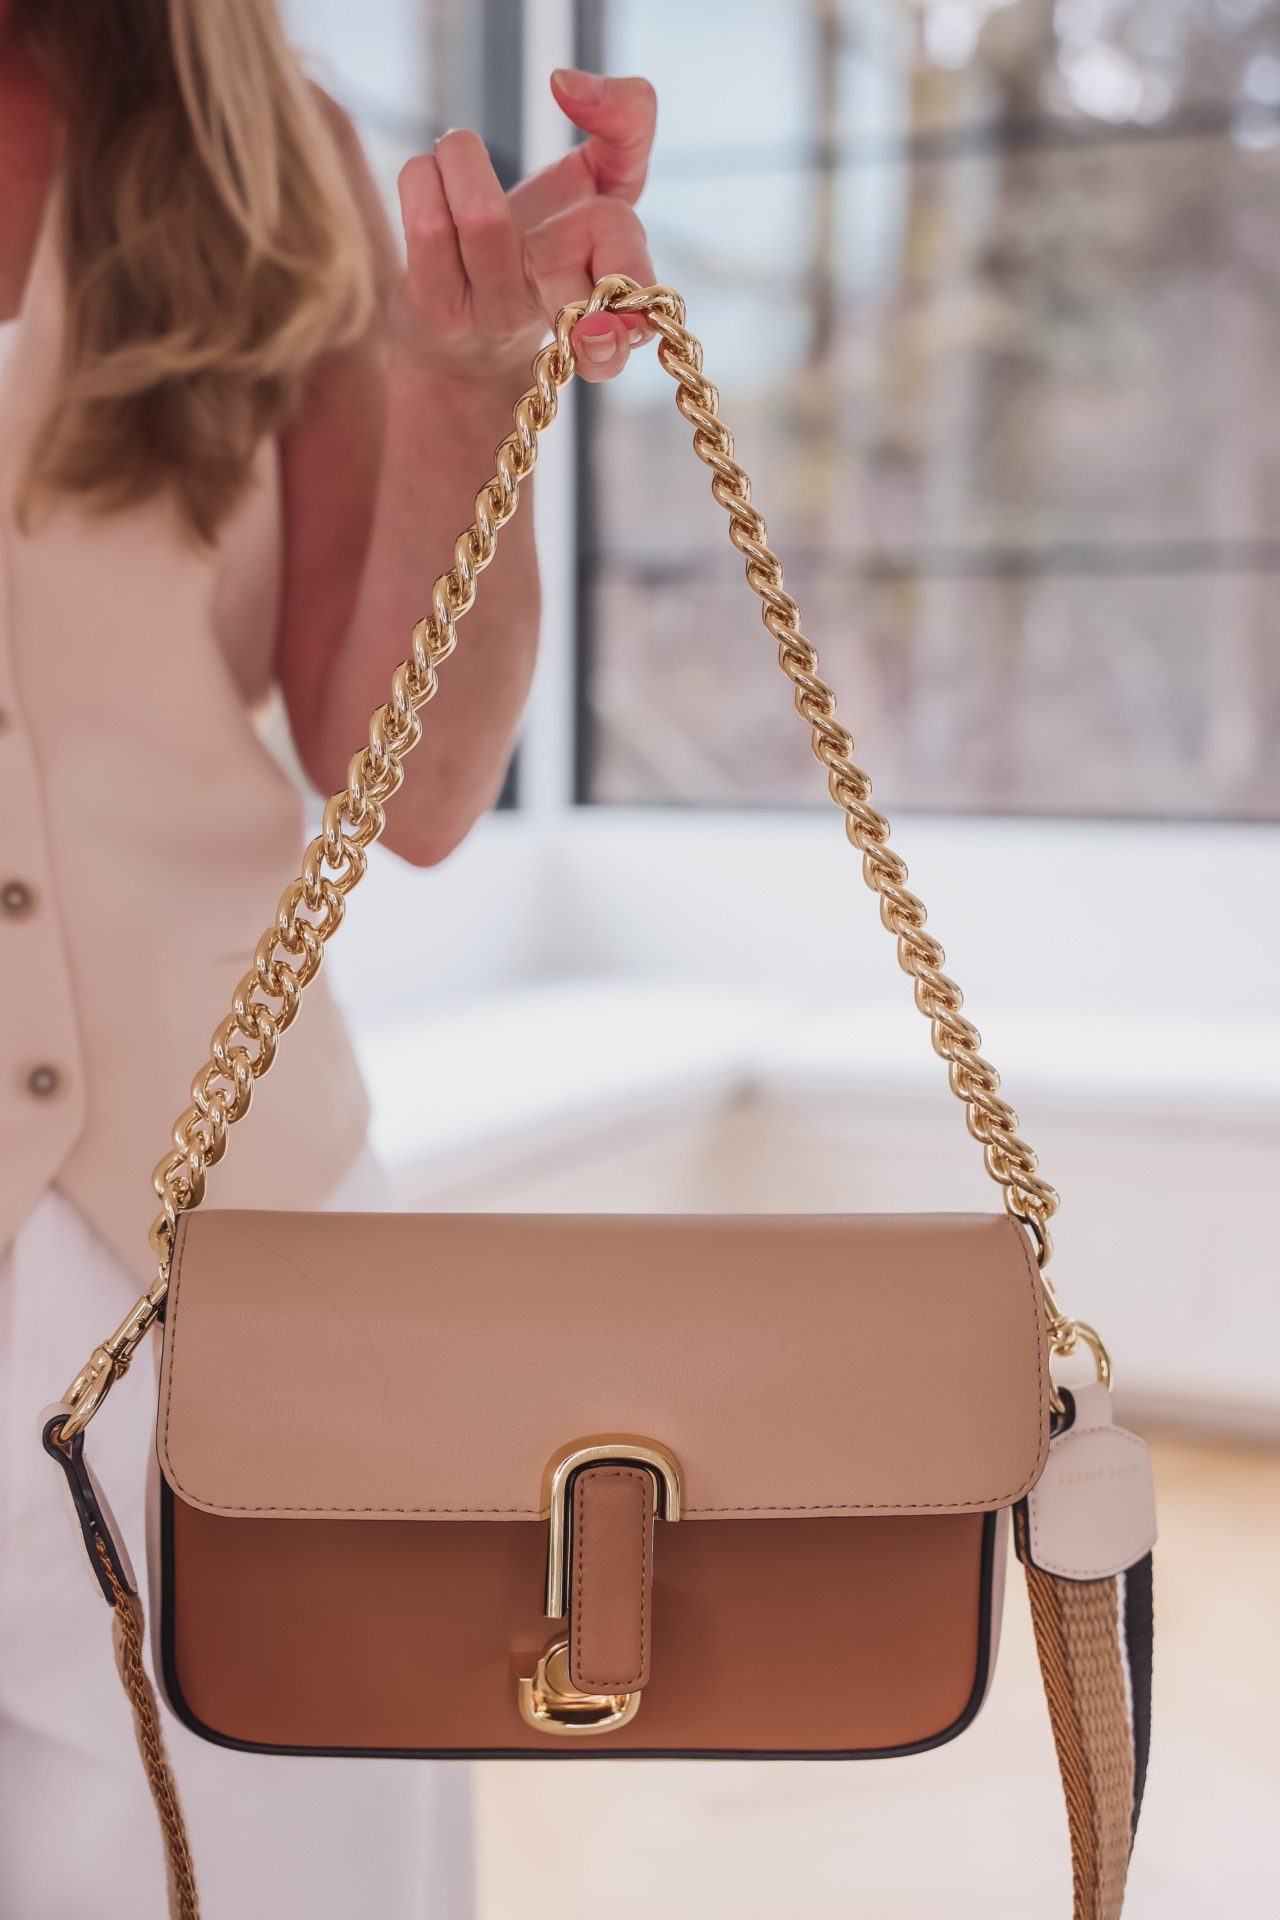 This Season's Must Have Bags